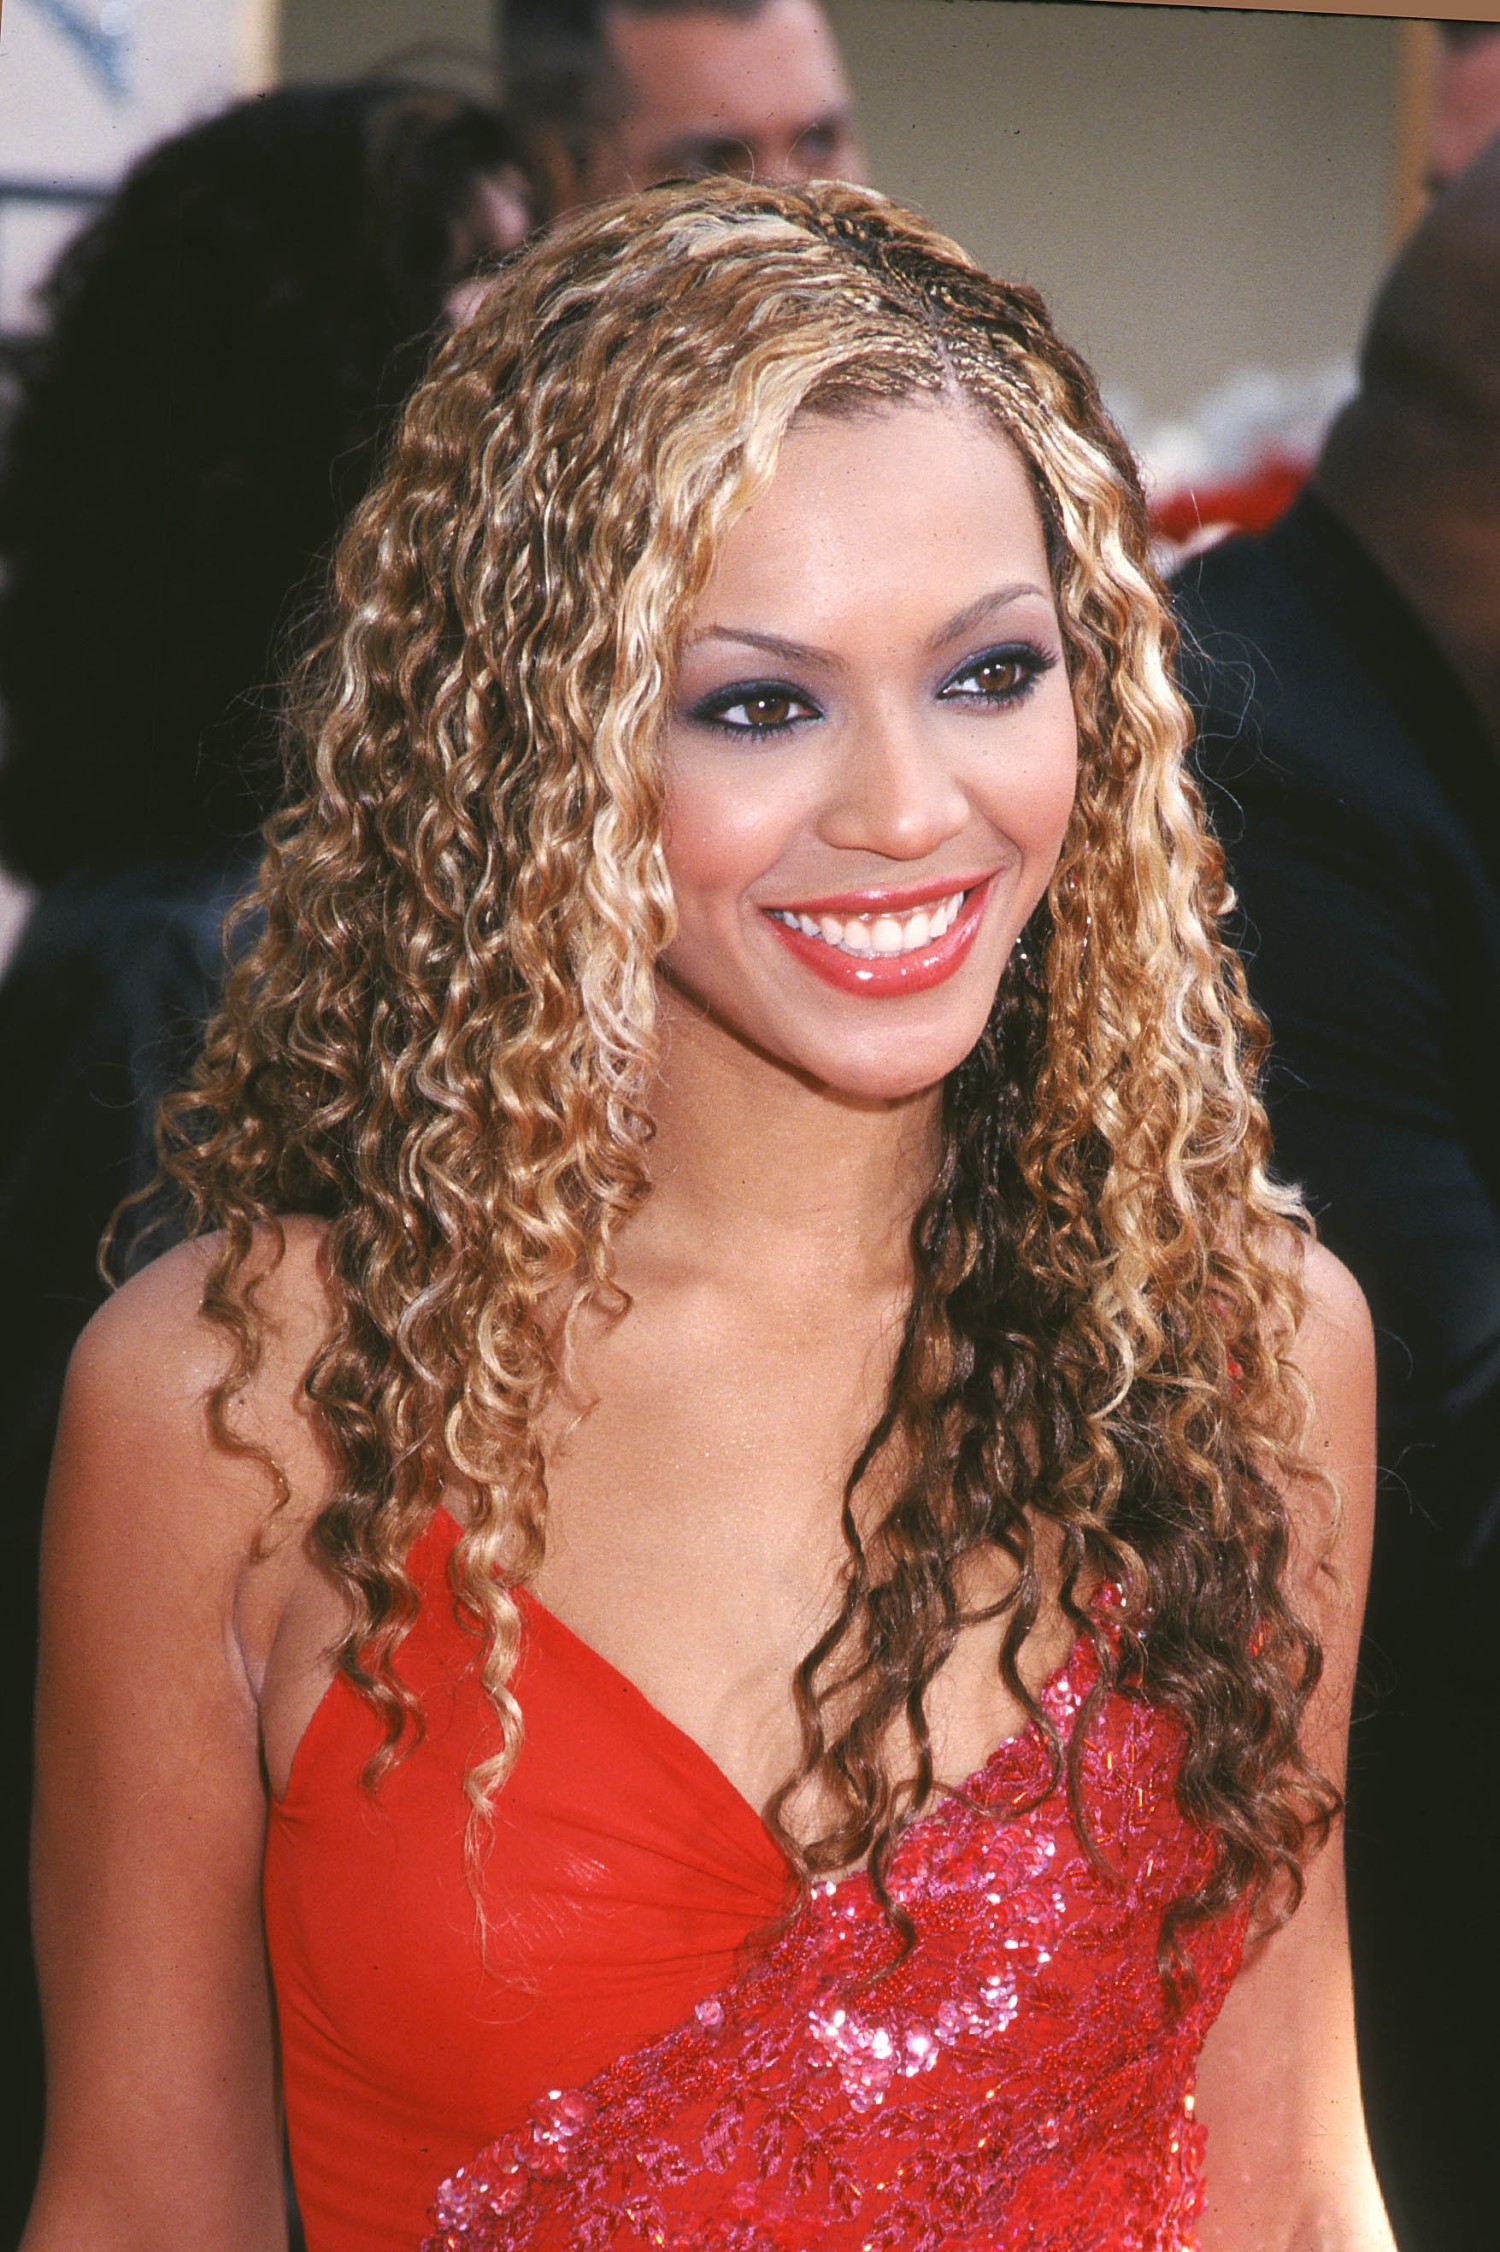 Beyonce's hair evolution: See the singer's stunning styles over the years